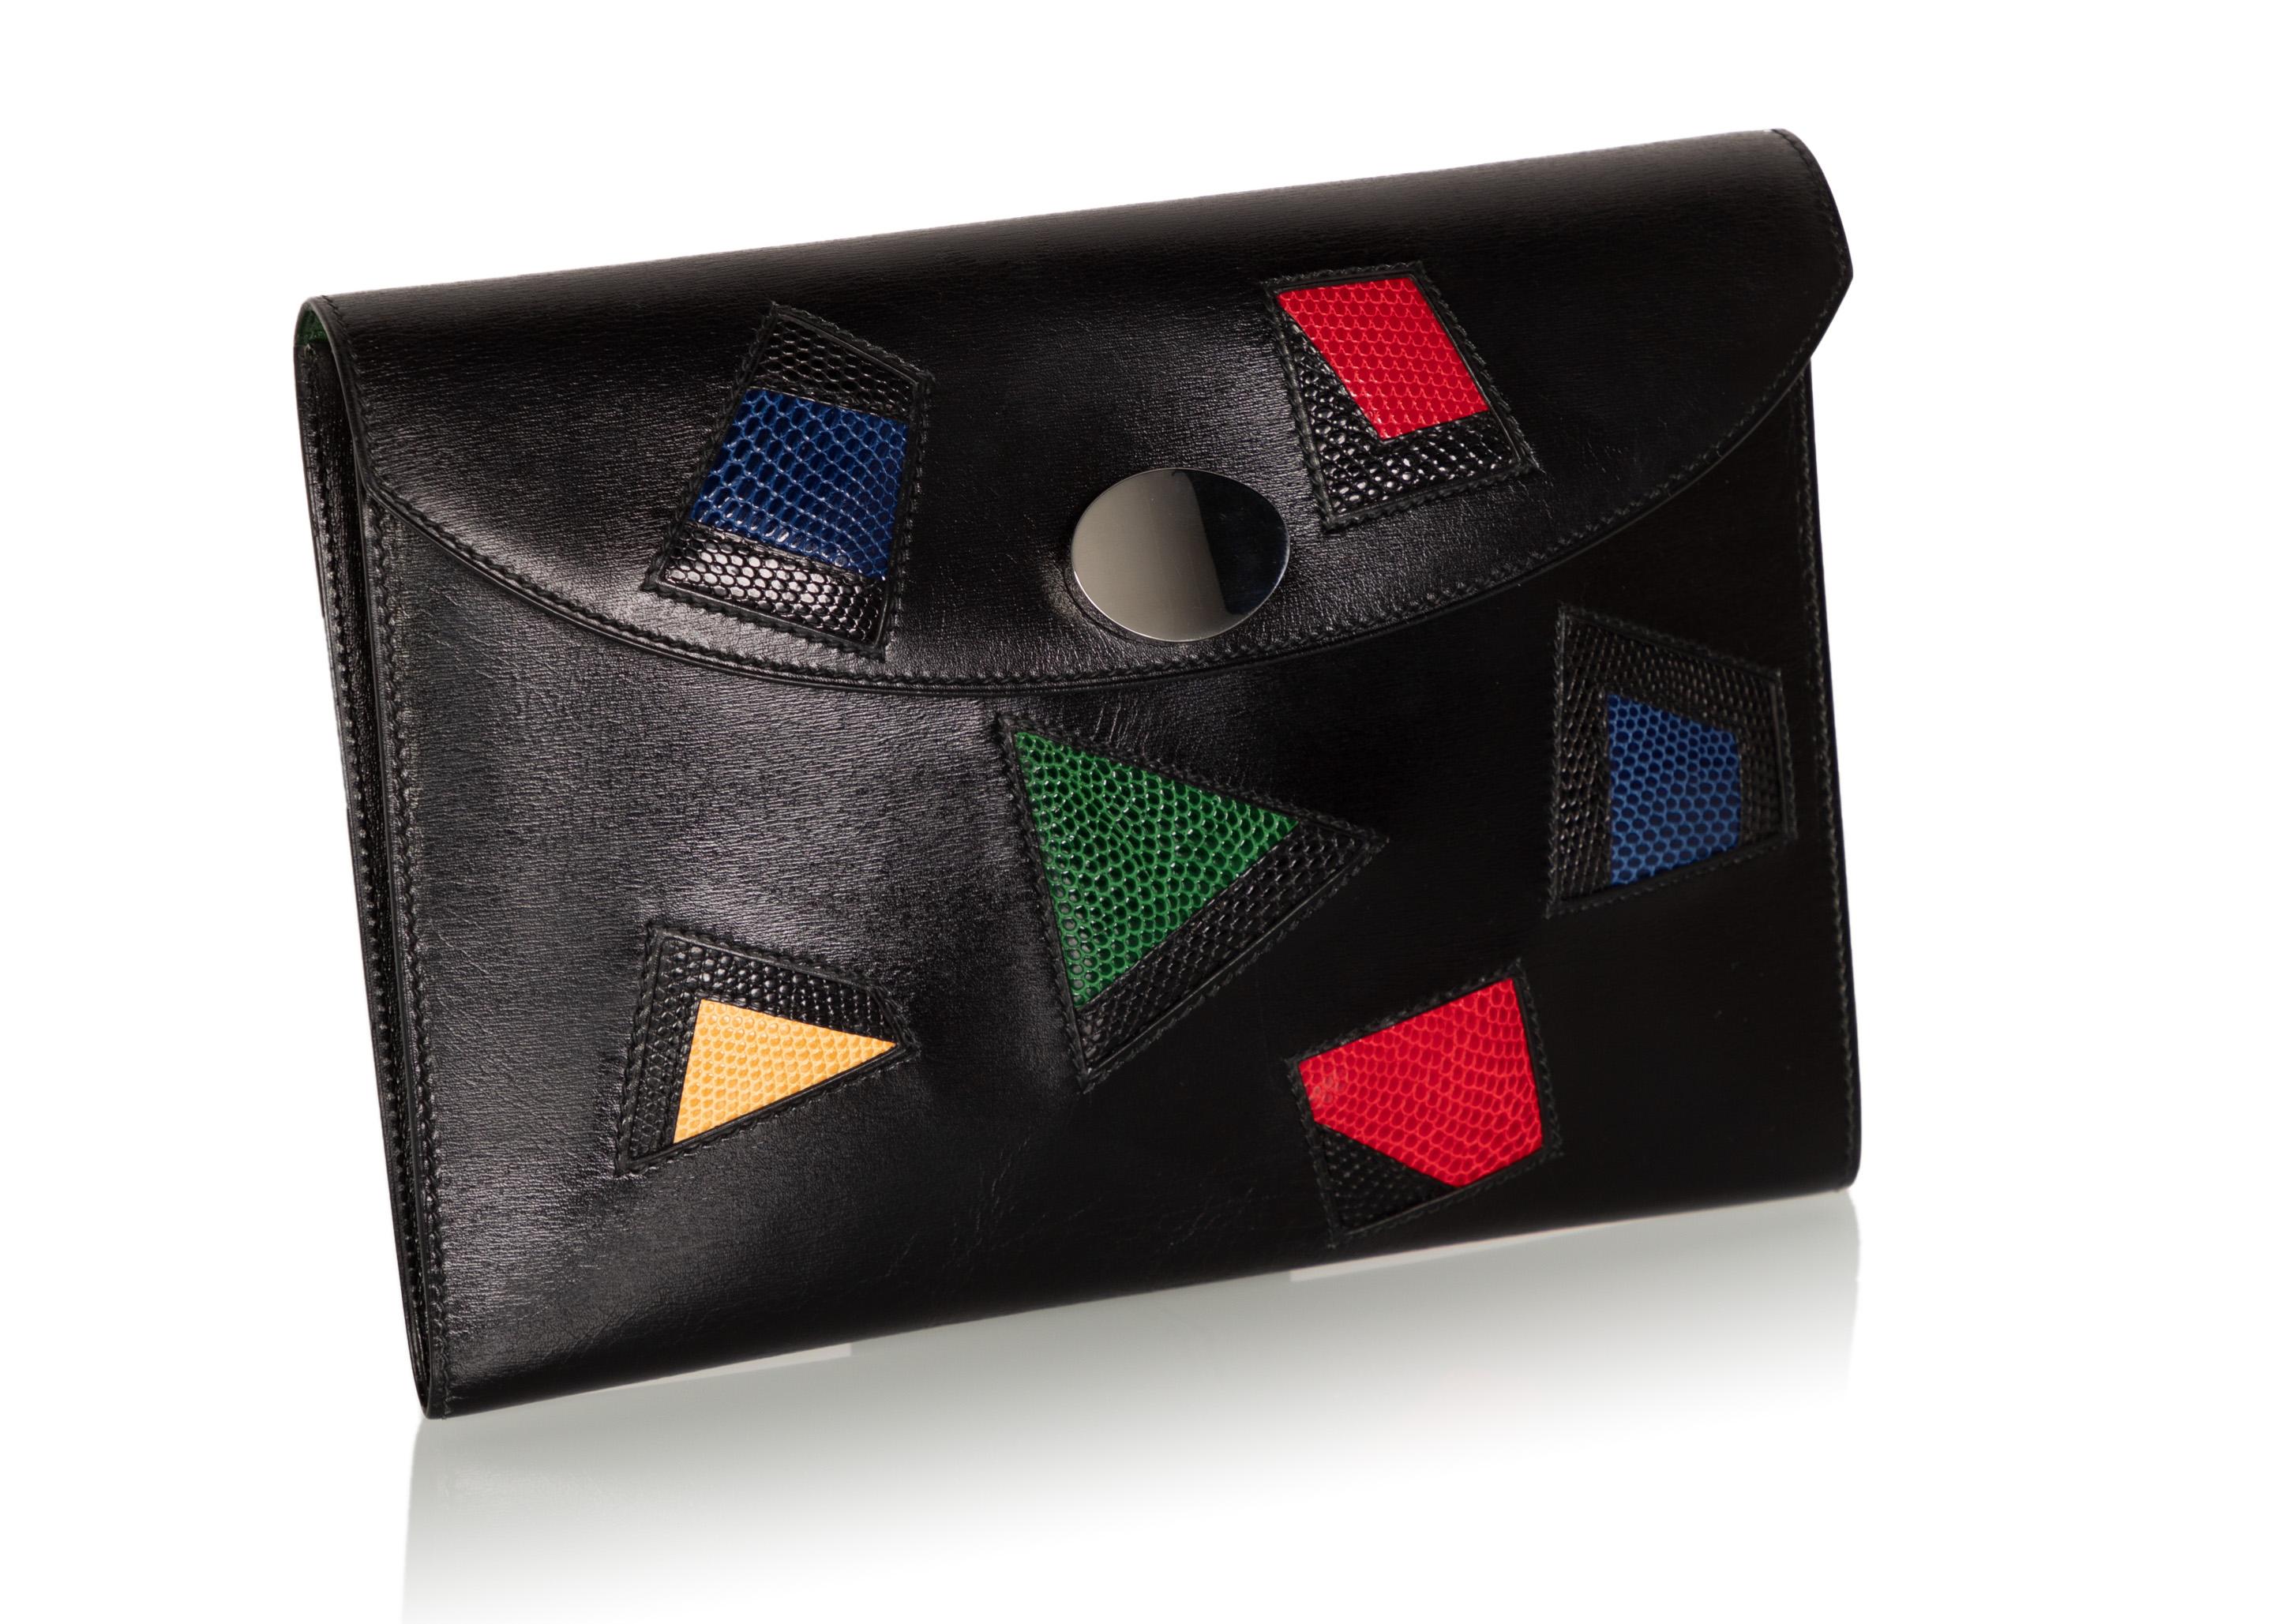 Hermes Black Leather Multicolored Lizard Clutch Rare, 1980s In Excellent Condition For Sale In Boca Raton, FL